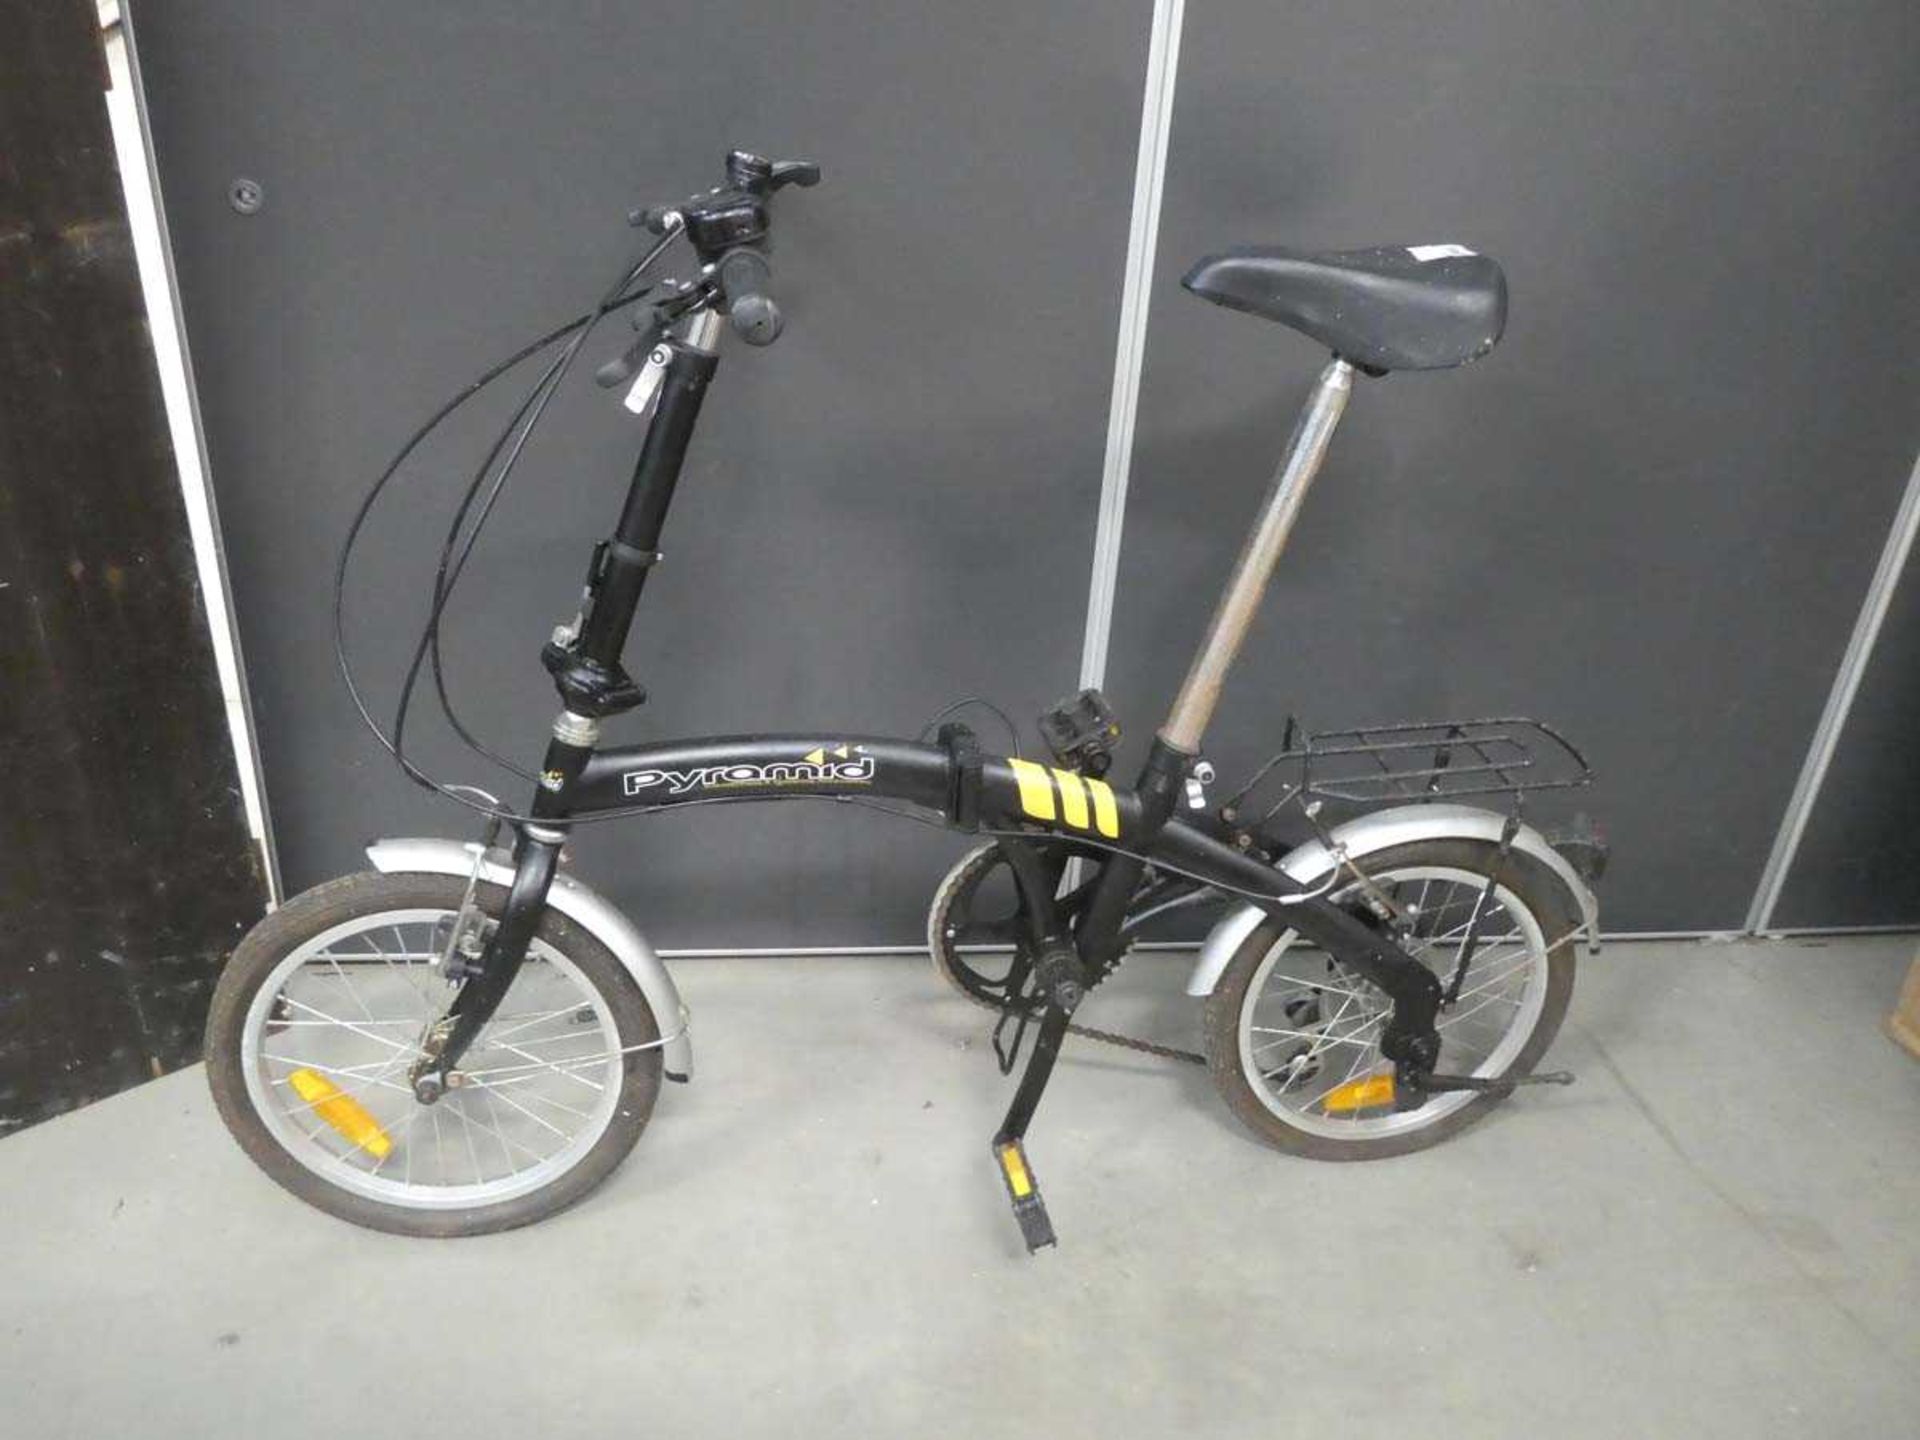 Pyramid folding cycle in black and yellow